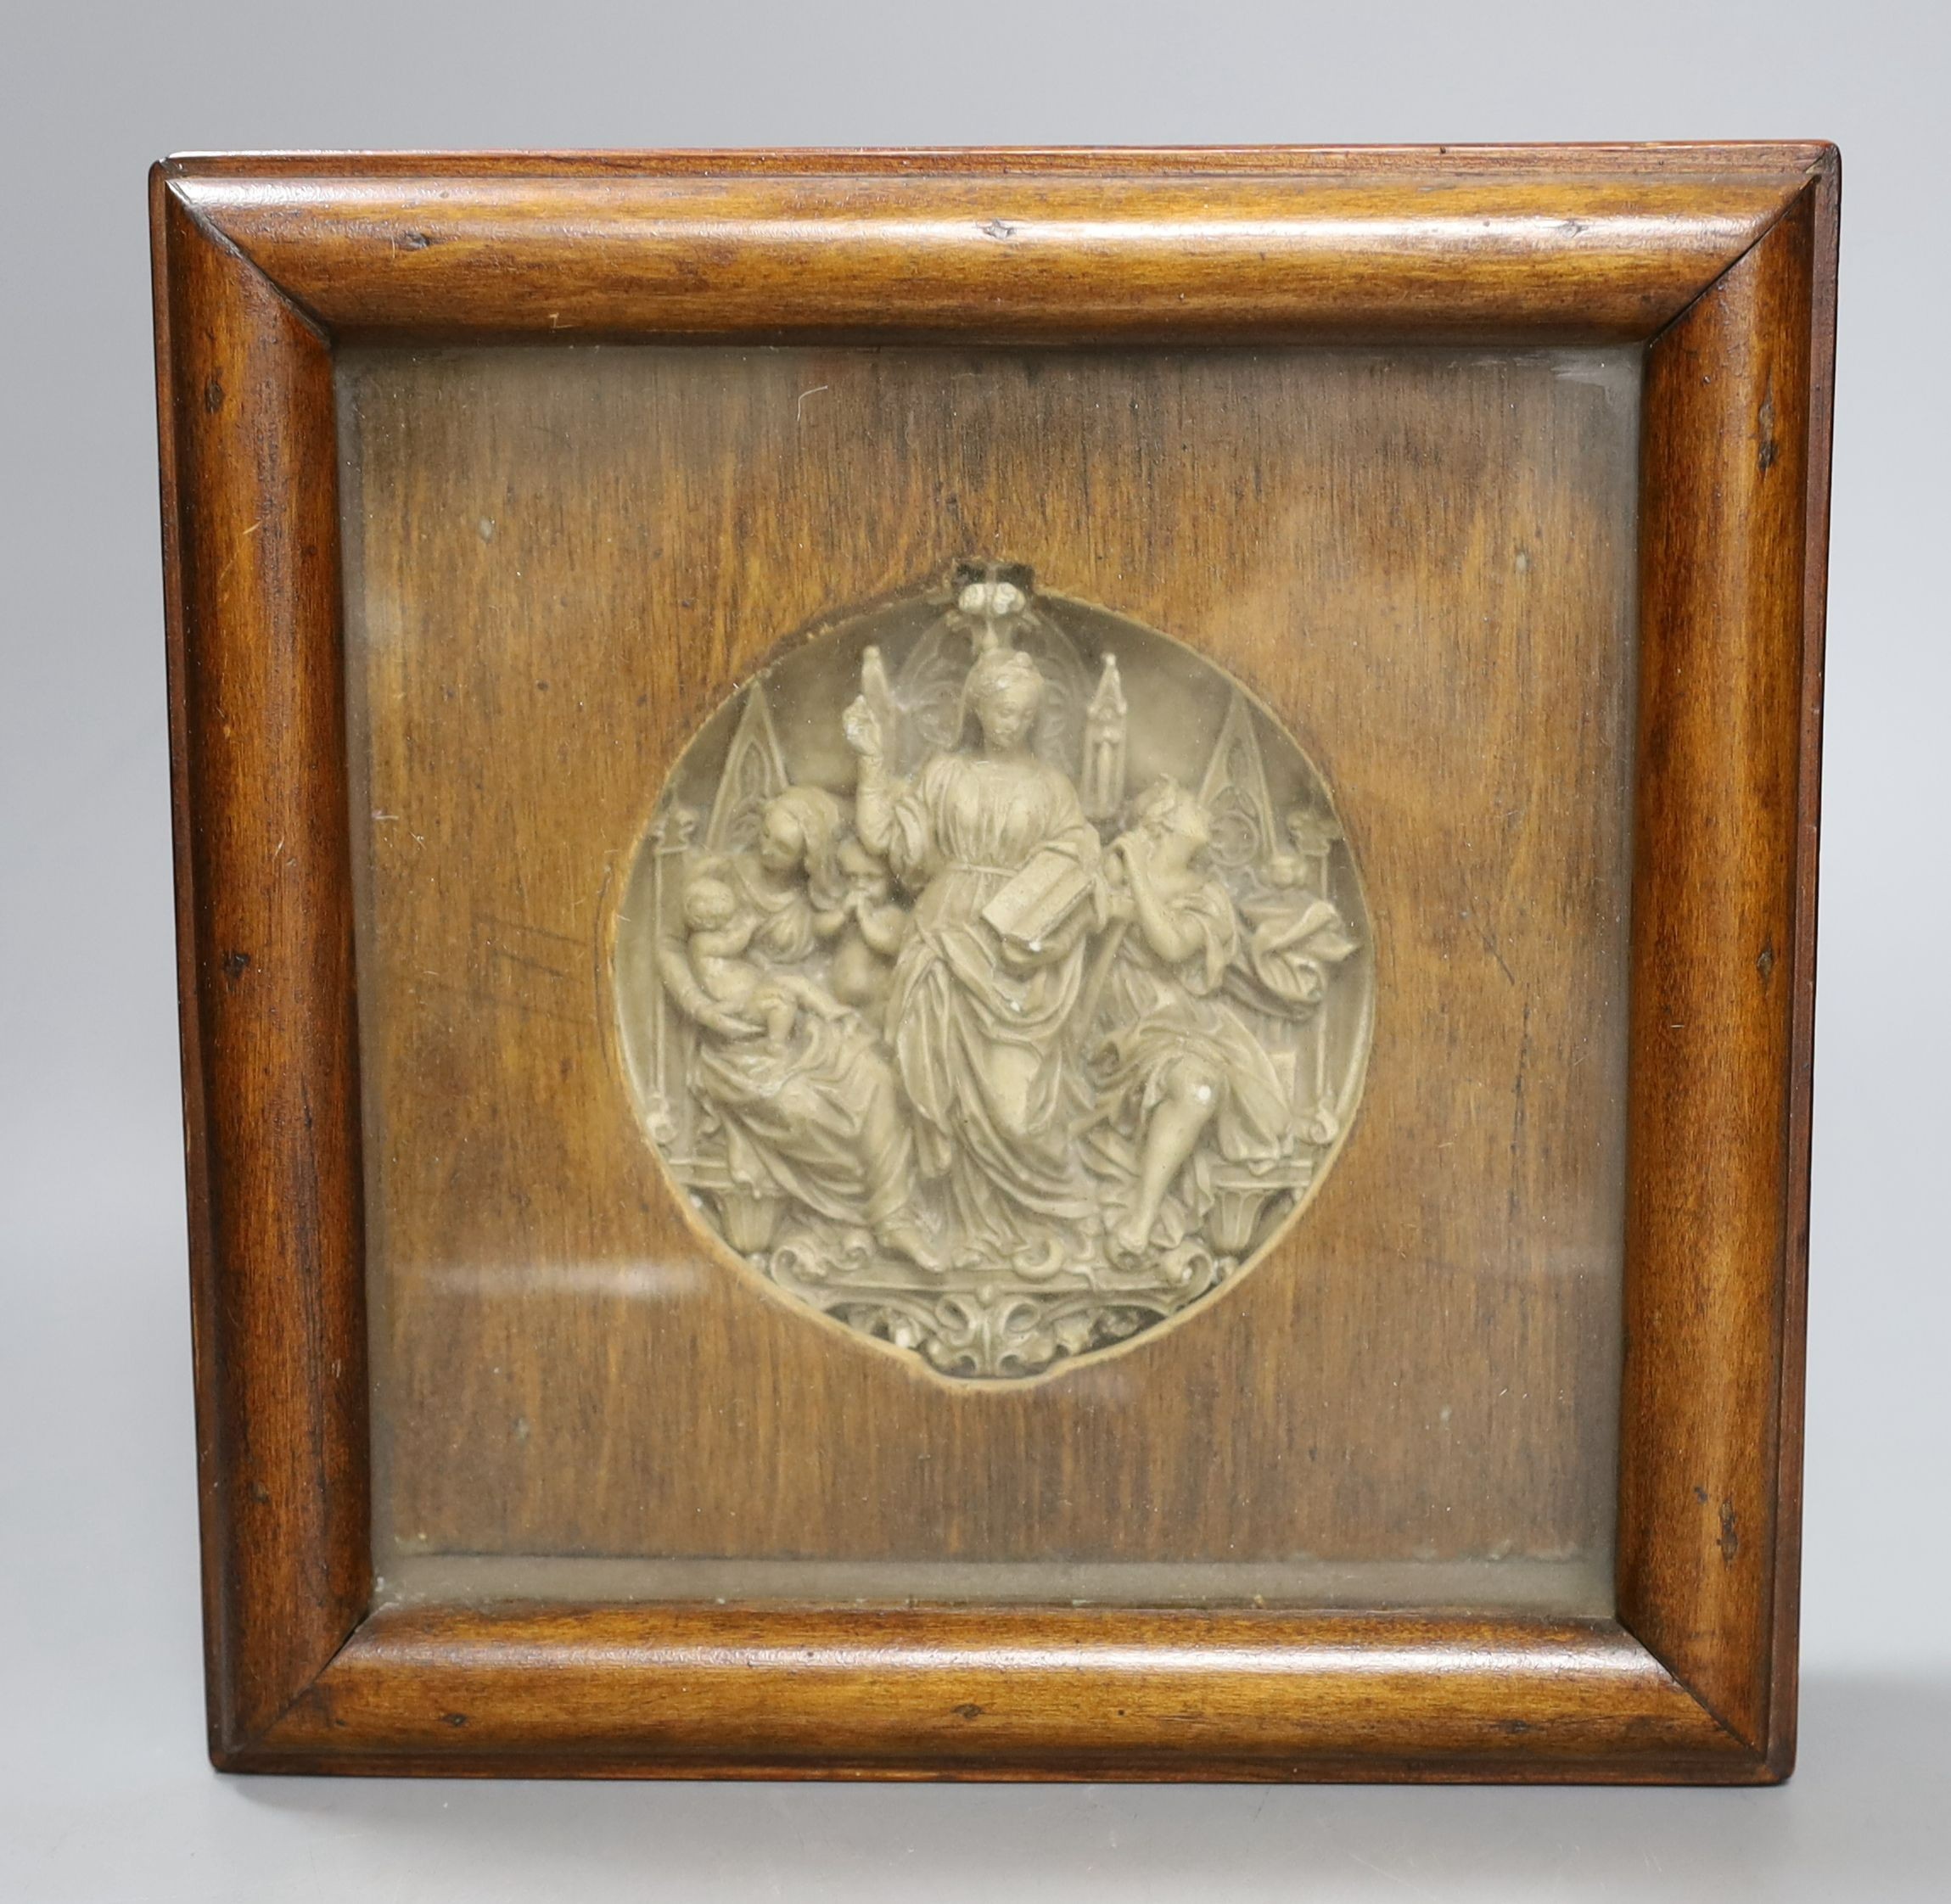 A 19th century Gothic revival plaster relief, depicting figures within altar frame, framed